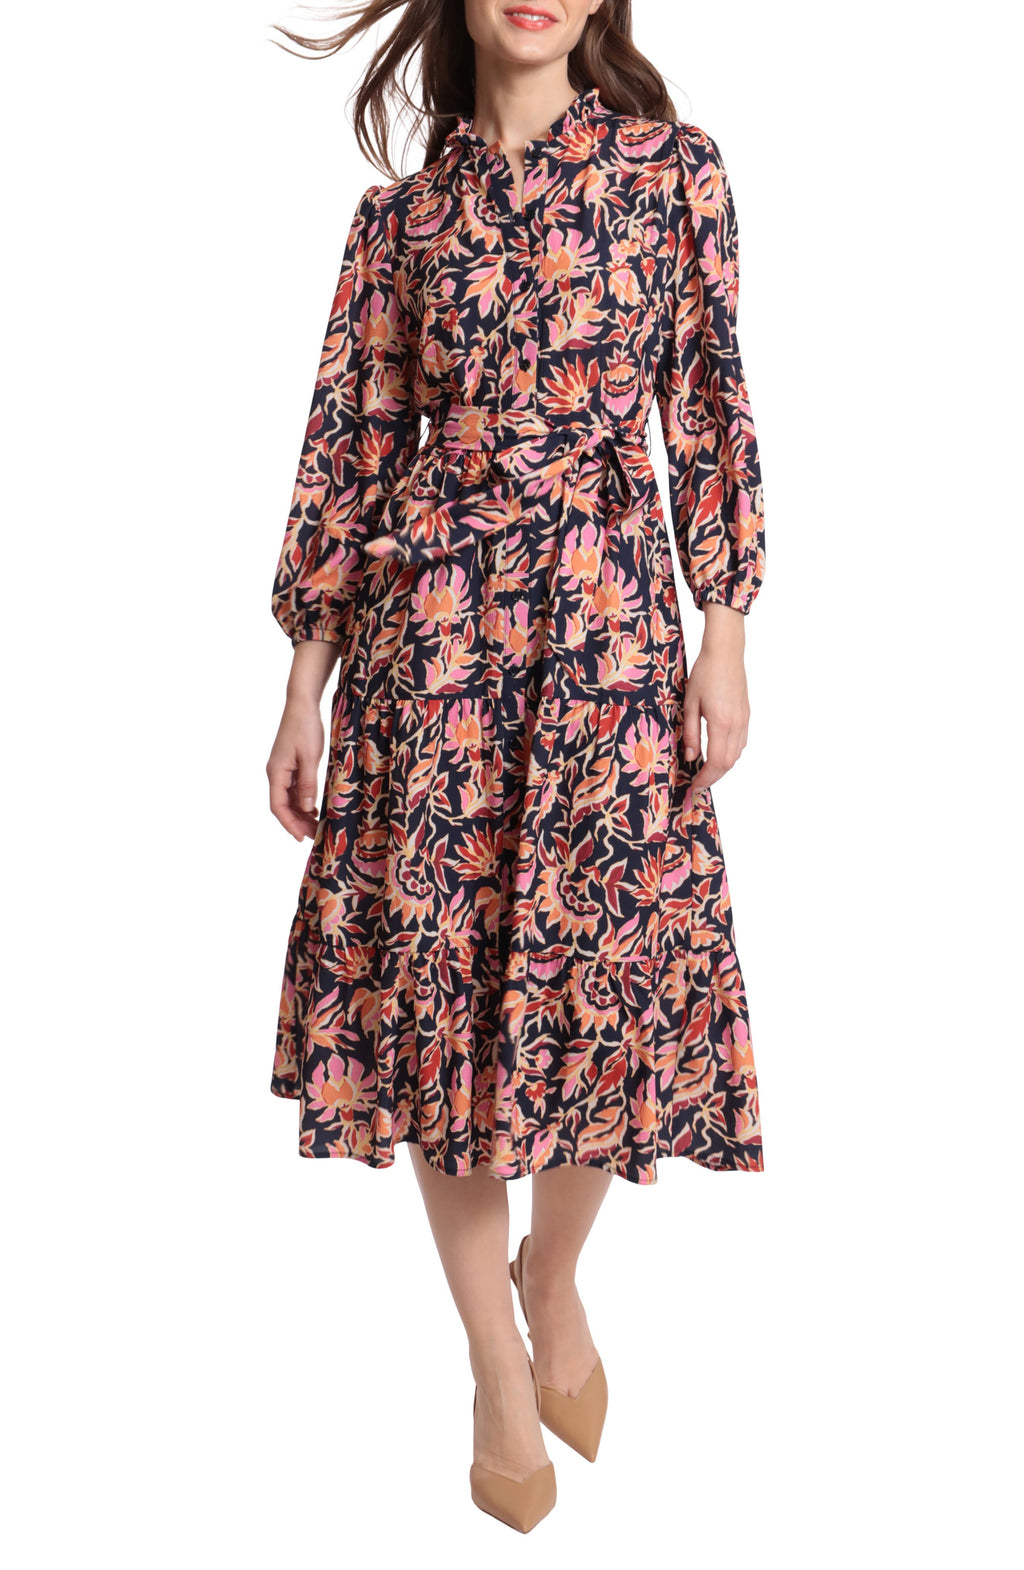 DONNA MORGAN FOR MAGGY Floral Long Sleeve Maxi Dress, Main, color, NAVY/ PINK